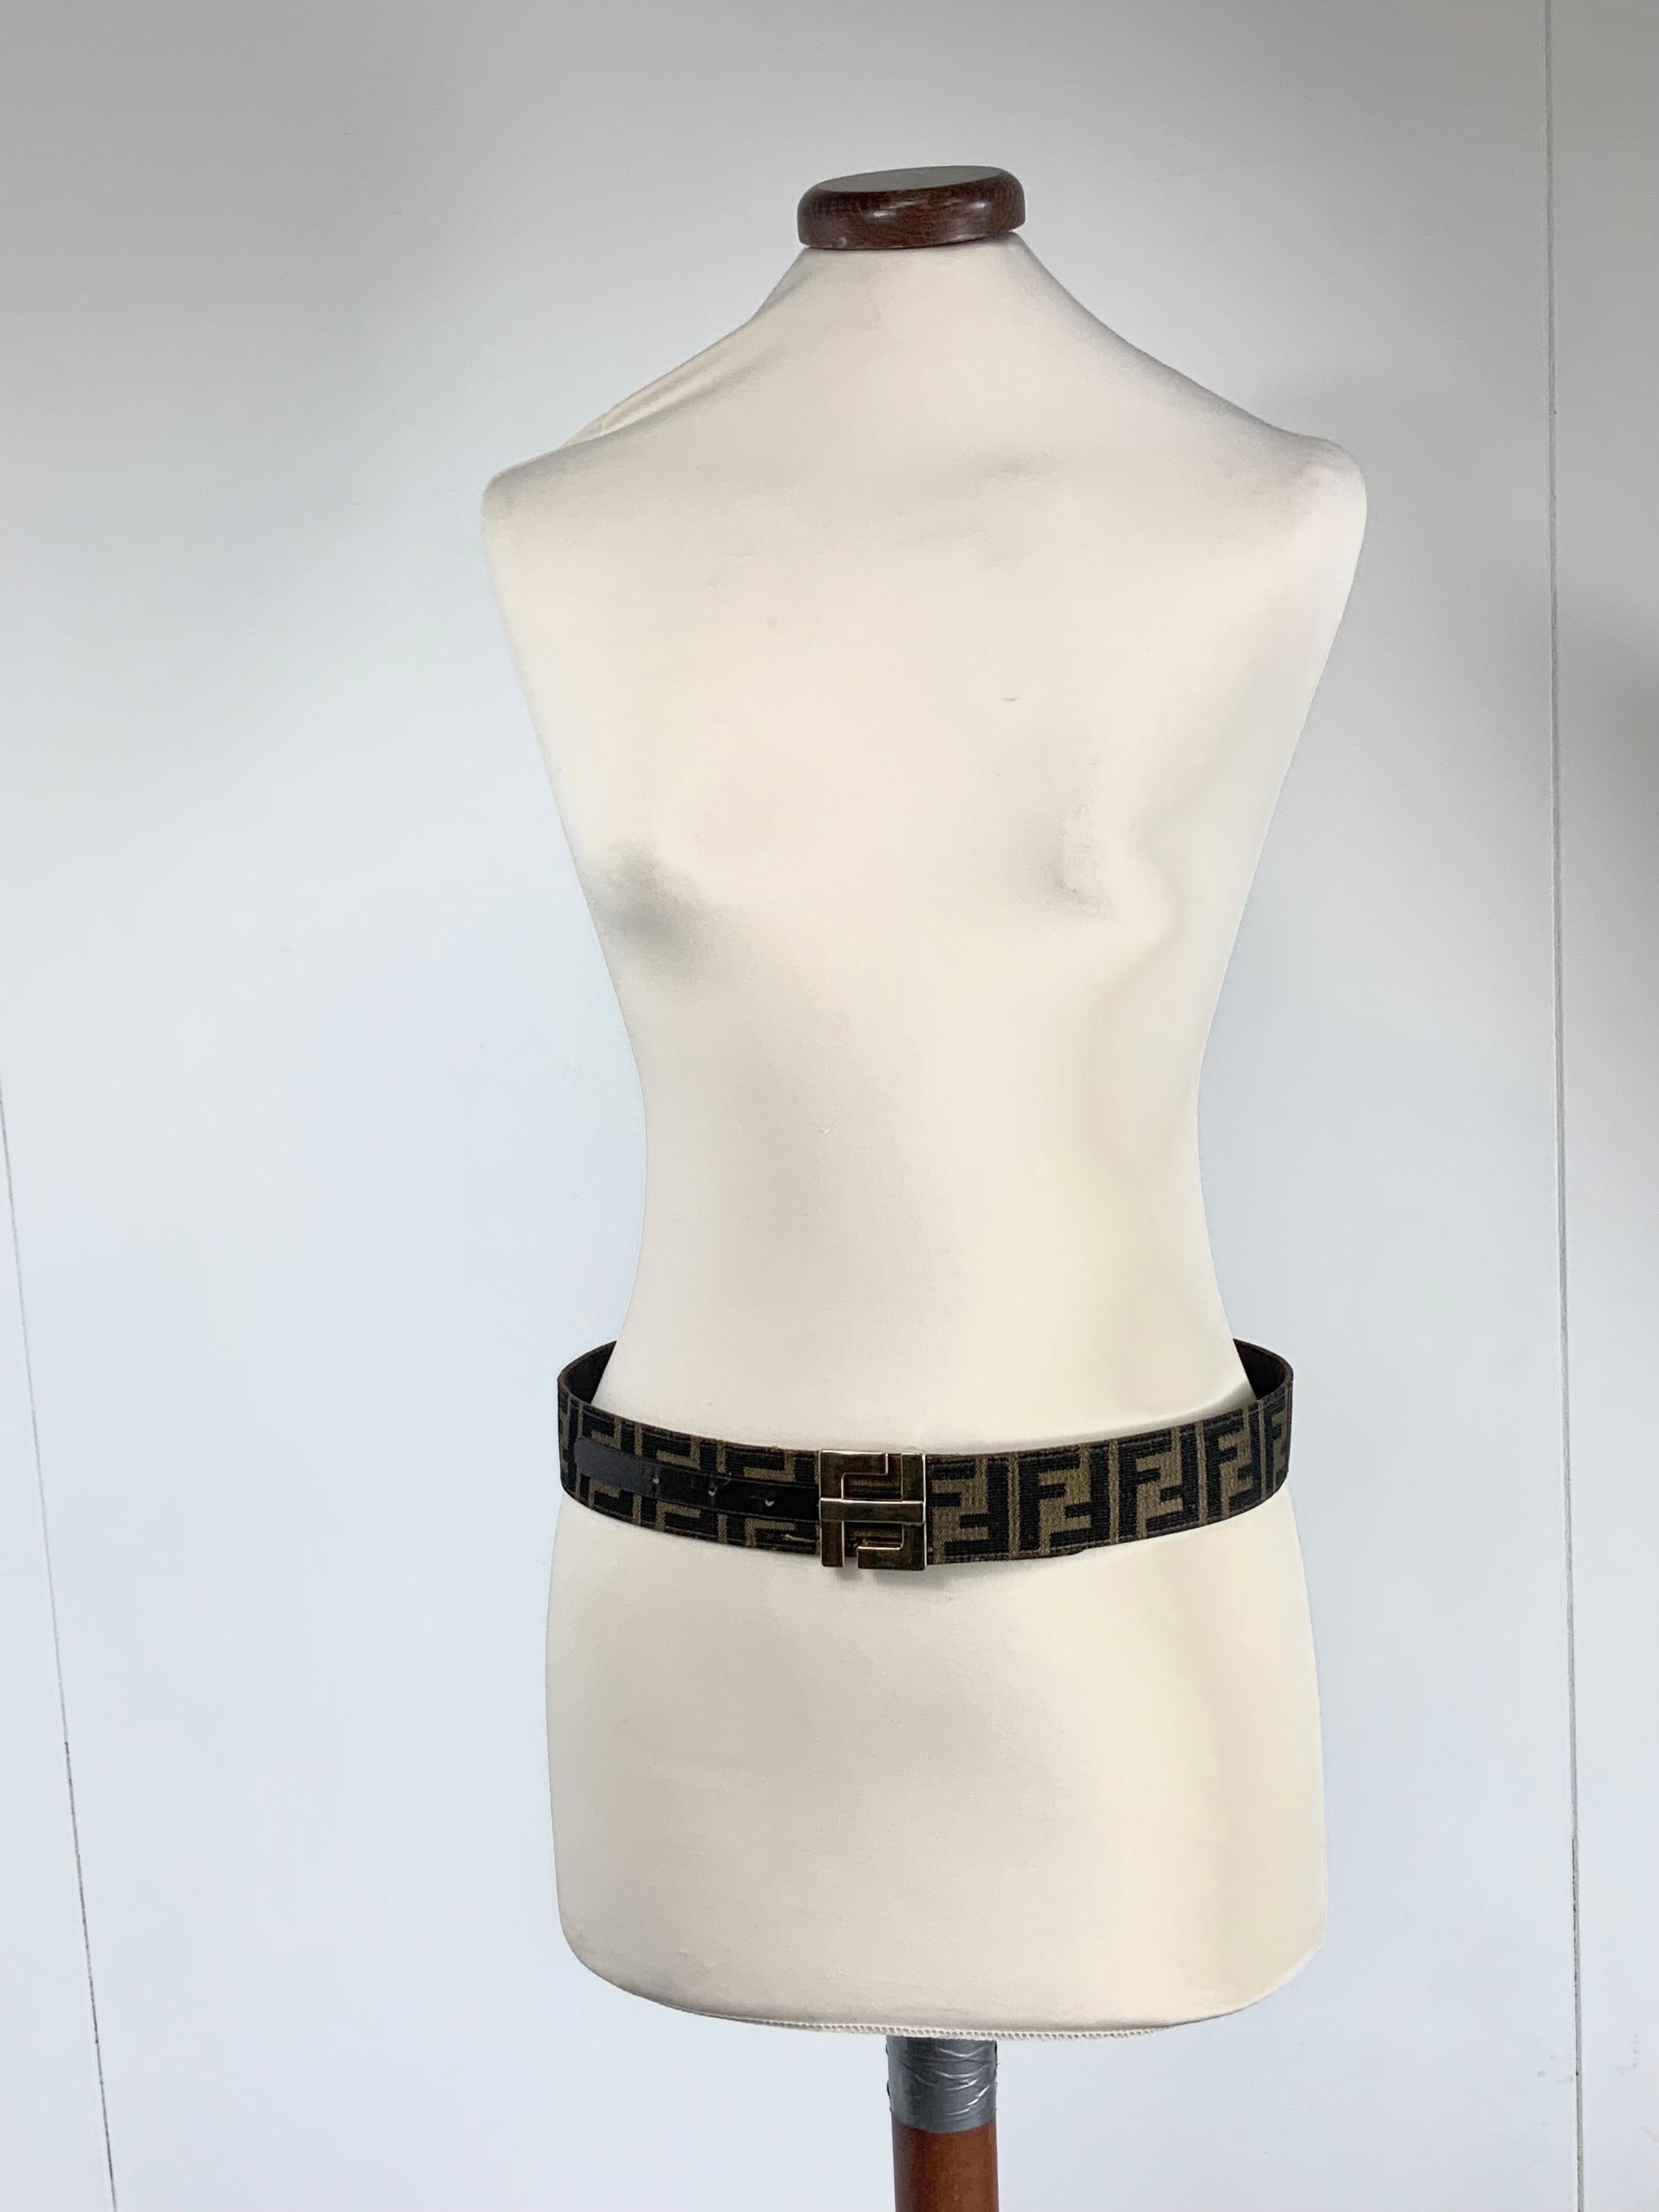 FENDI BELT.
In leather and monogram fabric.
Golden hardware but oxidized, as shown in the photos.
Size indicated 80/32.
92 cm long
4 cm high
Vintage and preloved item.
As you can see from the photos, it shows signs of use and some pulled threads.